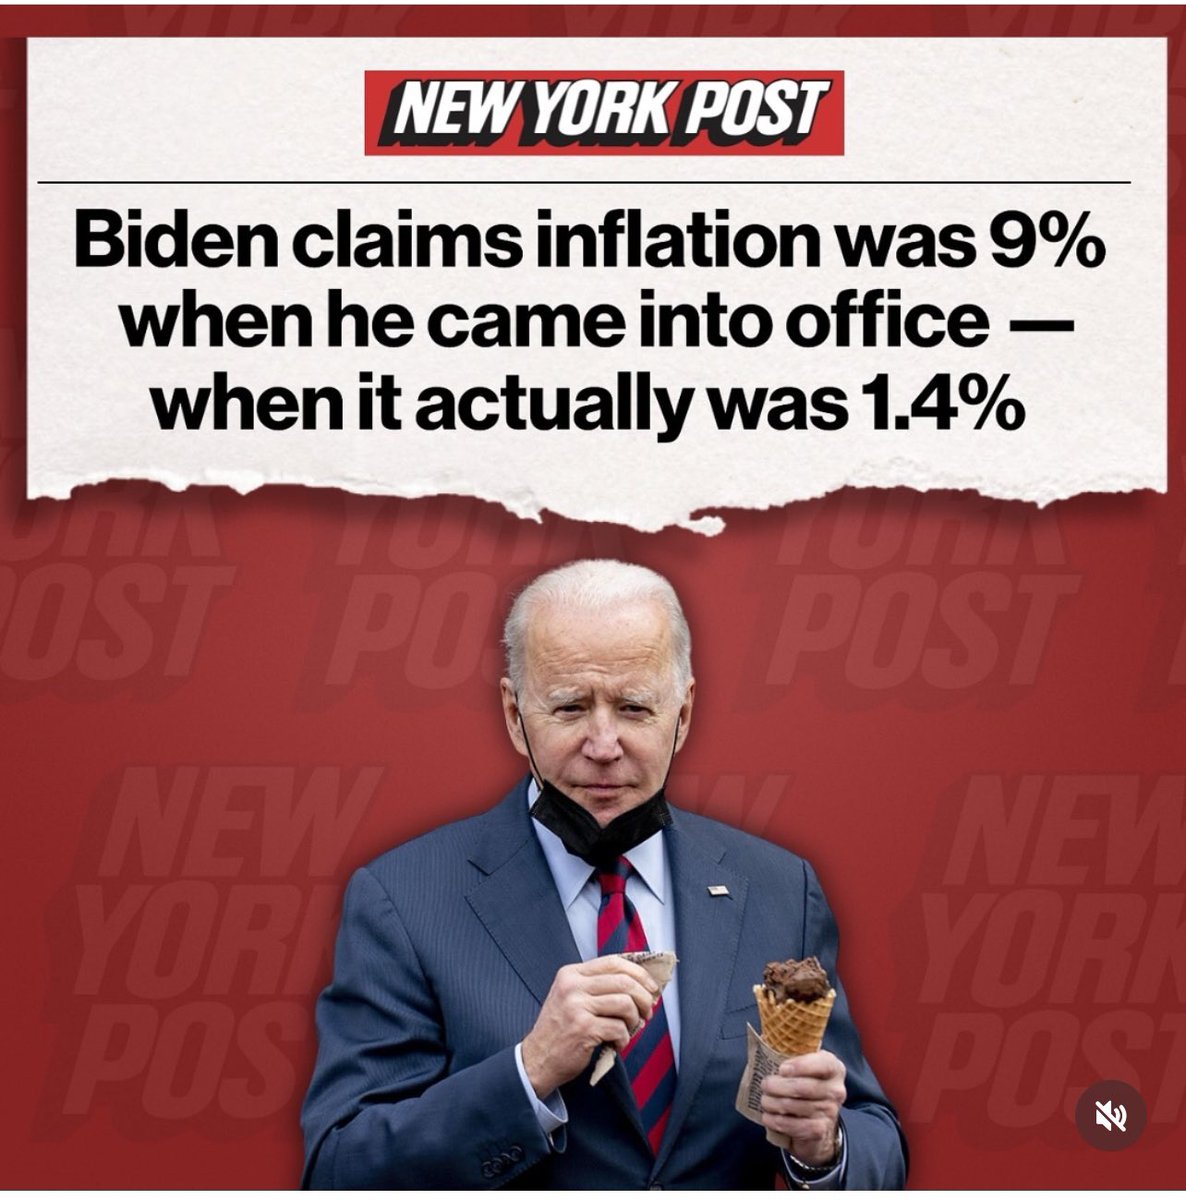 Biden has been a pathological liar for years. Vote Trump- Make groceries and gas affordable again. Not to mention lower interest rates on homes.